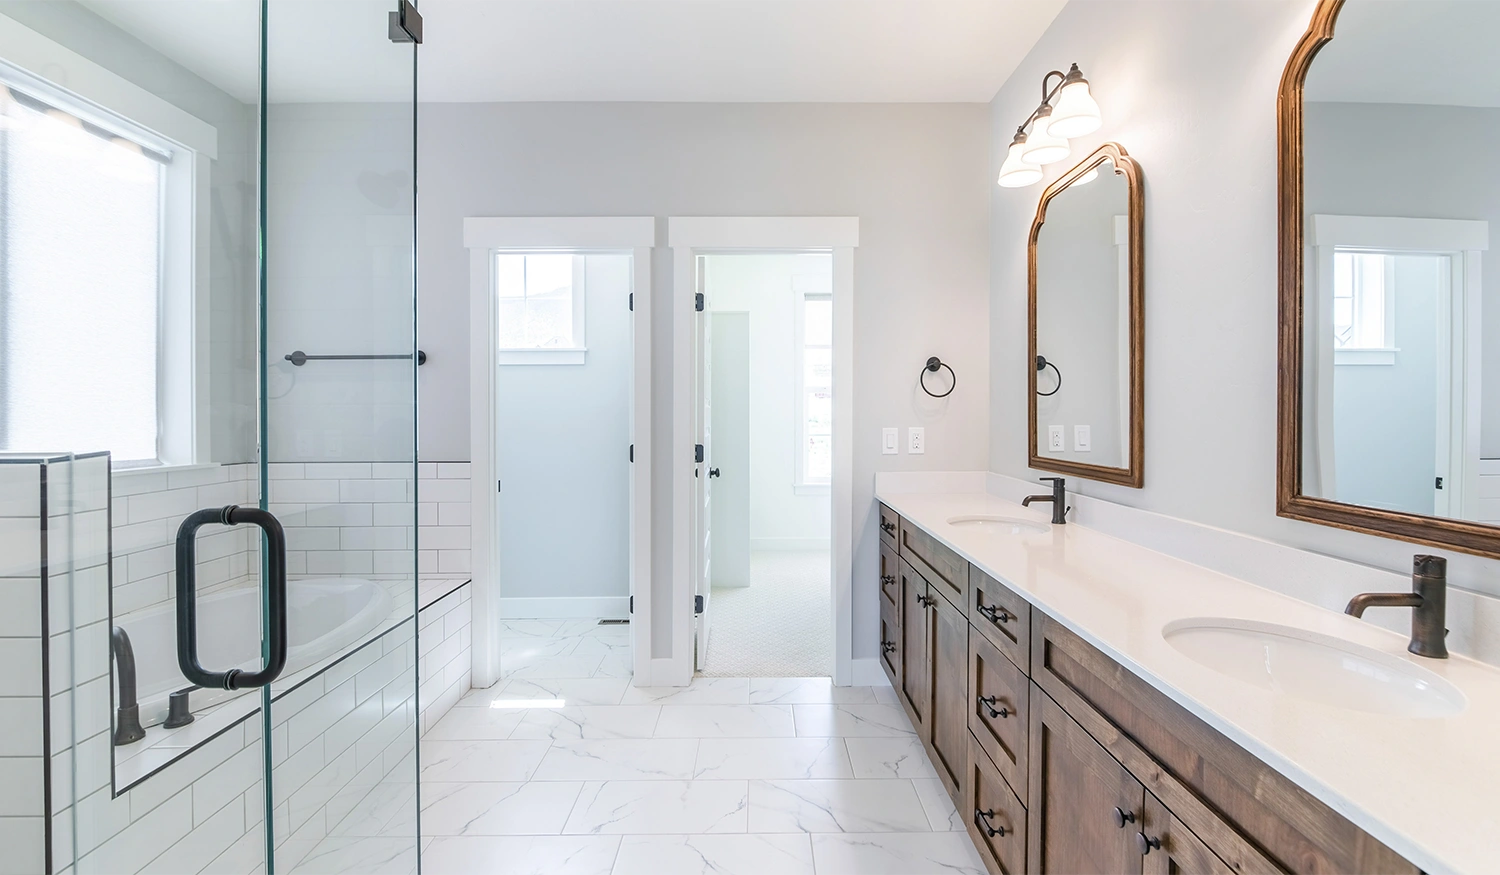 A remodeled bathroom featuring white floor tiles, a double sink vanity, and a bathtub.